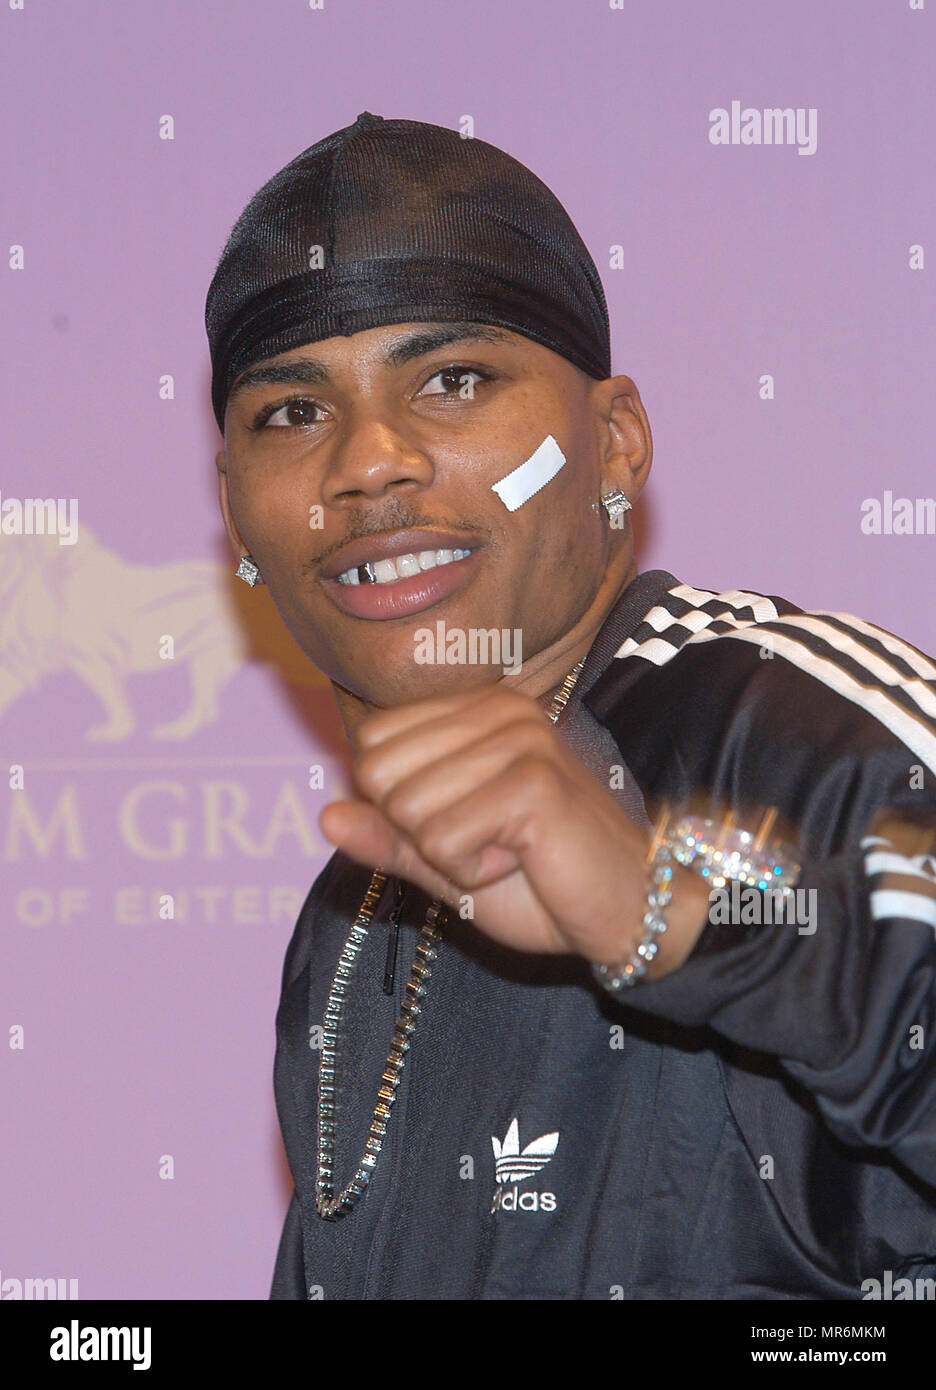 Nelly backstage at the 2002 Fox Billboard Music Awards held at the MGM Grand Hotel in Las Vegas, NV., December 9, 2002.Nelly02B Red Carpet Event, Vertical, USA, Film Industry, Celebrities,  Photography, Bestof, Arts Culture and Entertainment, Topix Celebrities fashion /  Vertical, Best of, Event in Hollywood Life - California,  Red Carpet and backstage, USA, Film Industry, Celebrities,  movie celebrities, TV celebrities, Music celebrities, Photography, Bestof, Arts Culture and Entertainment,  Topix, headshot, vertical, one person,, from the year , 2002, inquiry tsuni@Gamma-USA.com Stock Photo